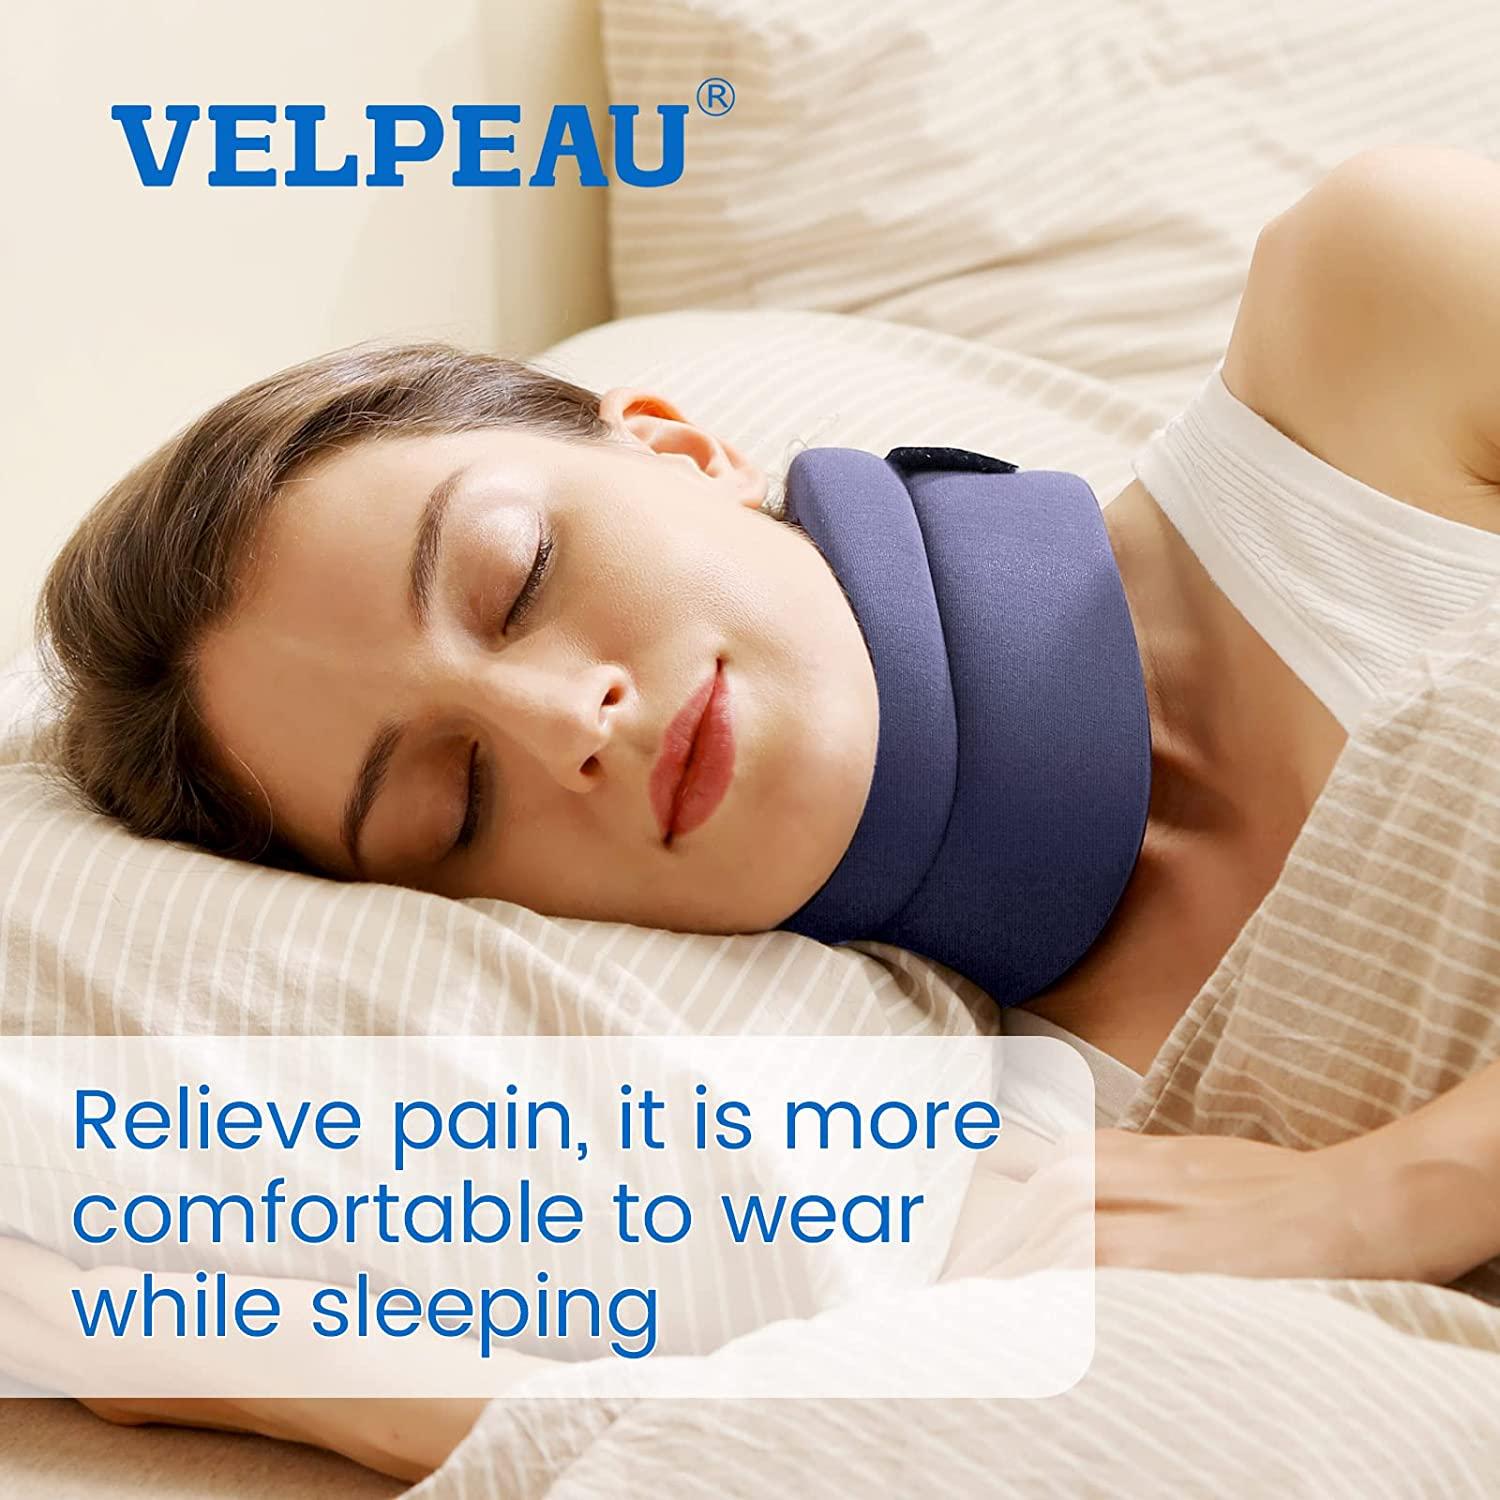 VELPEAU Neck Brace -Foam Cervical Collar - Soft Neck Support Relieves Pain  Pressure in Spine - Wraps Aligns Stabilizes Vertebrae - Can Be Used During  Sleep (Comfort Blue Medium 3) Medium (Pack